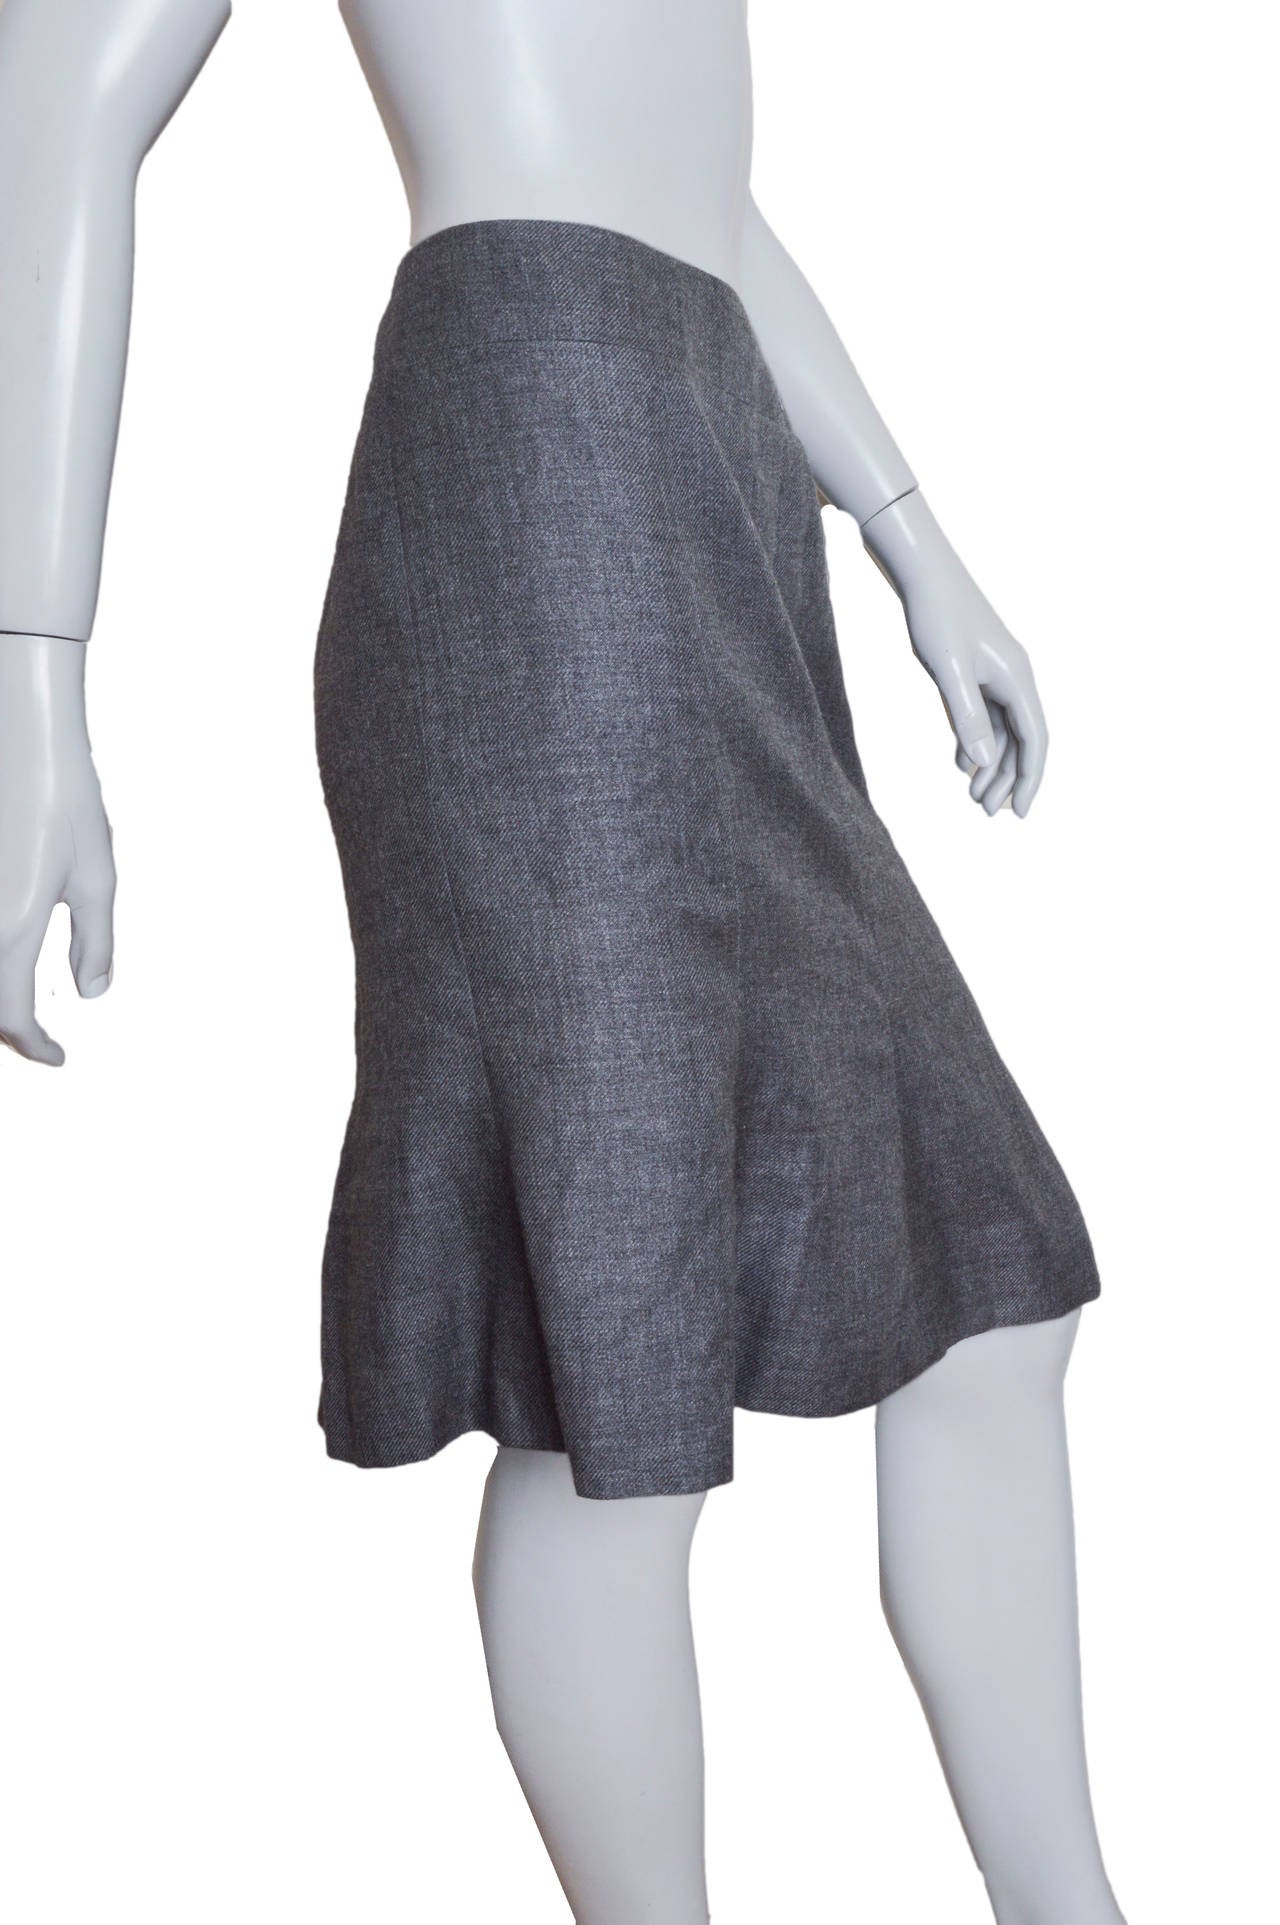 Classic Chanel gray tulip shaped skirt.
Wide waistband with flattering seaming.
Sits lower on hip, fits then flares slightly.
Double Cc logo on hip.
Lined in silk.
Tagged a size 48.